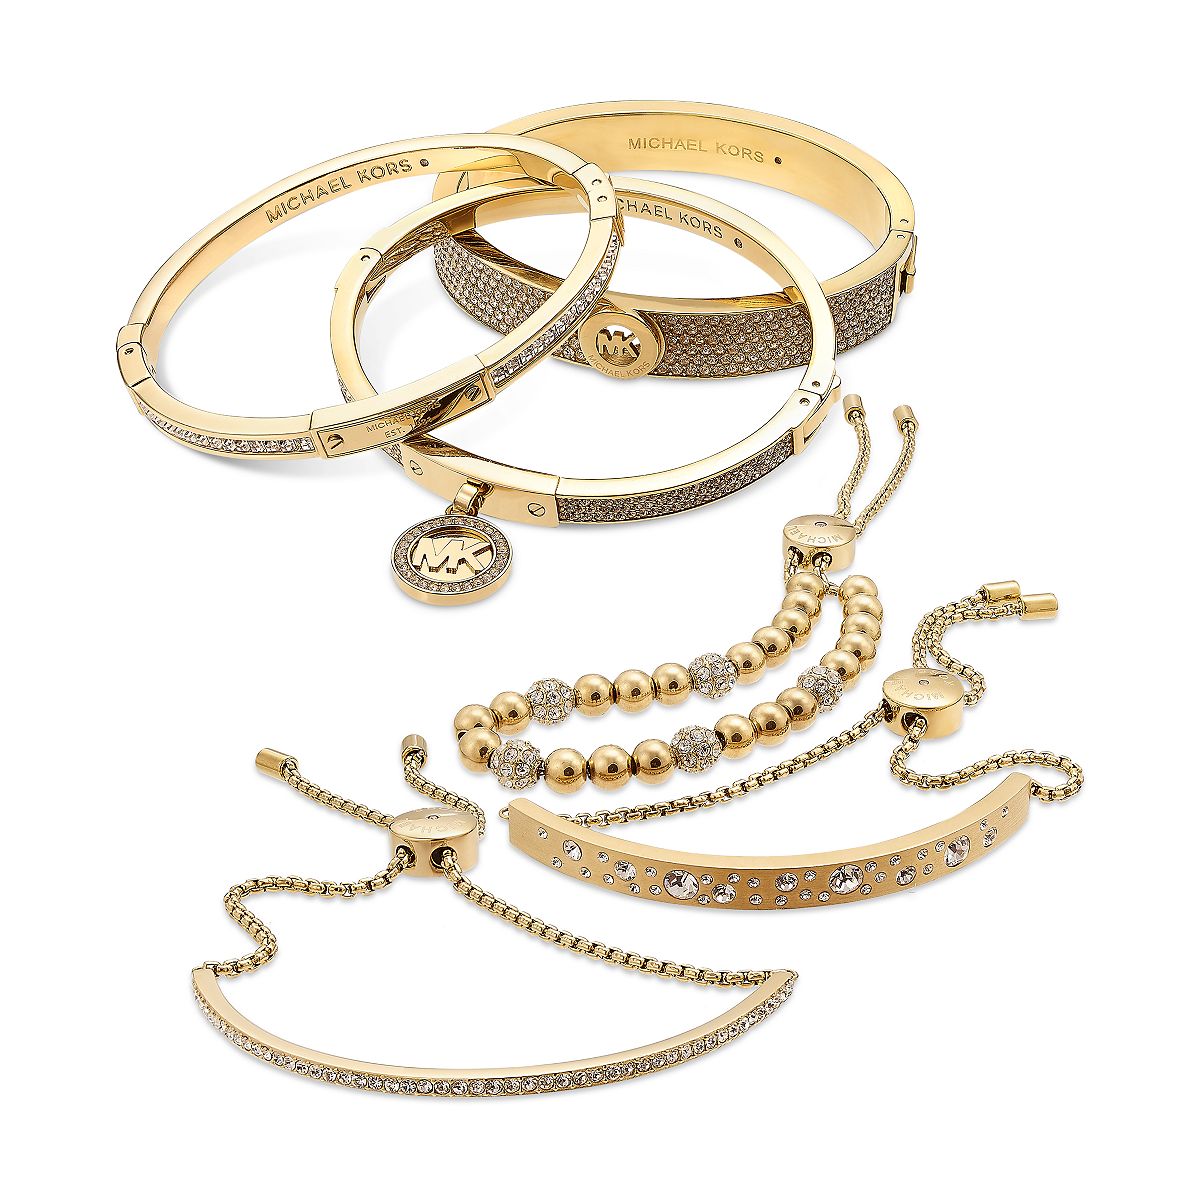 Michael Kors Outet Outlet "Stack Your Wrists" Bracelet Collection